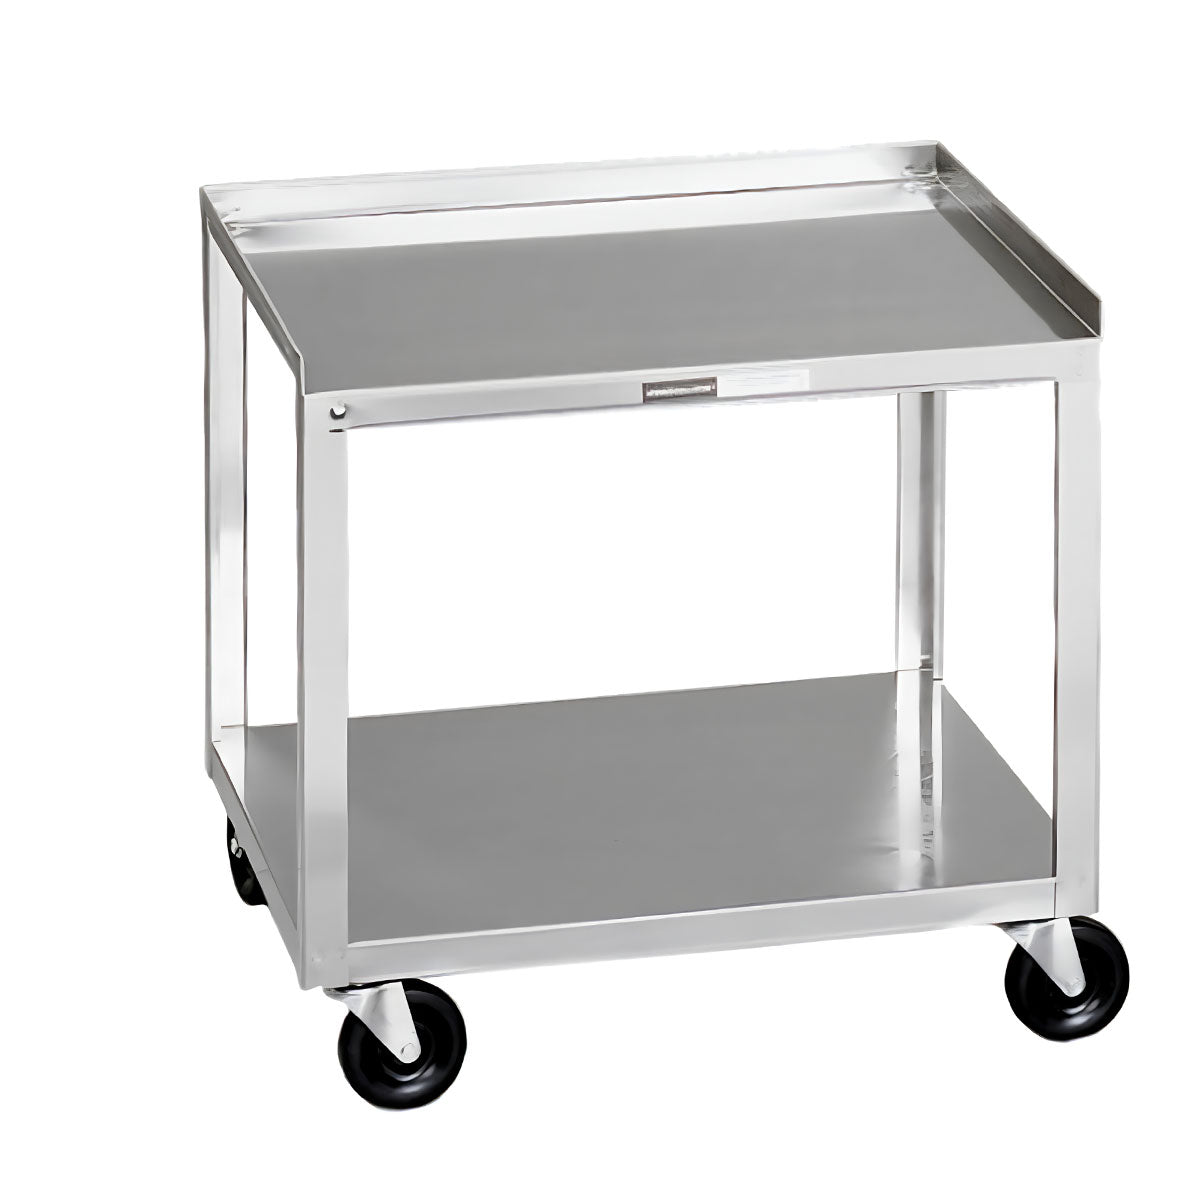 TROLLEY . 014 . Stainless Steel Medical Grade Cart